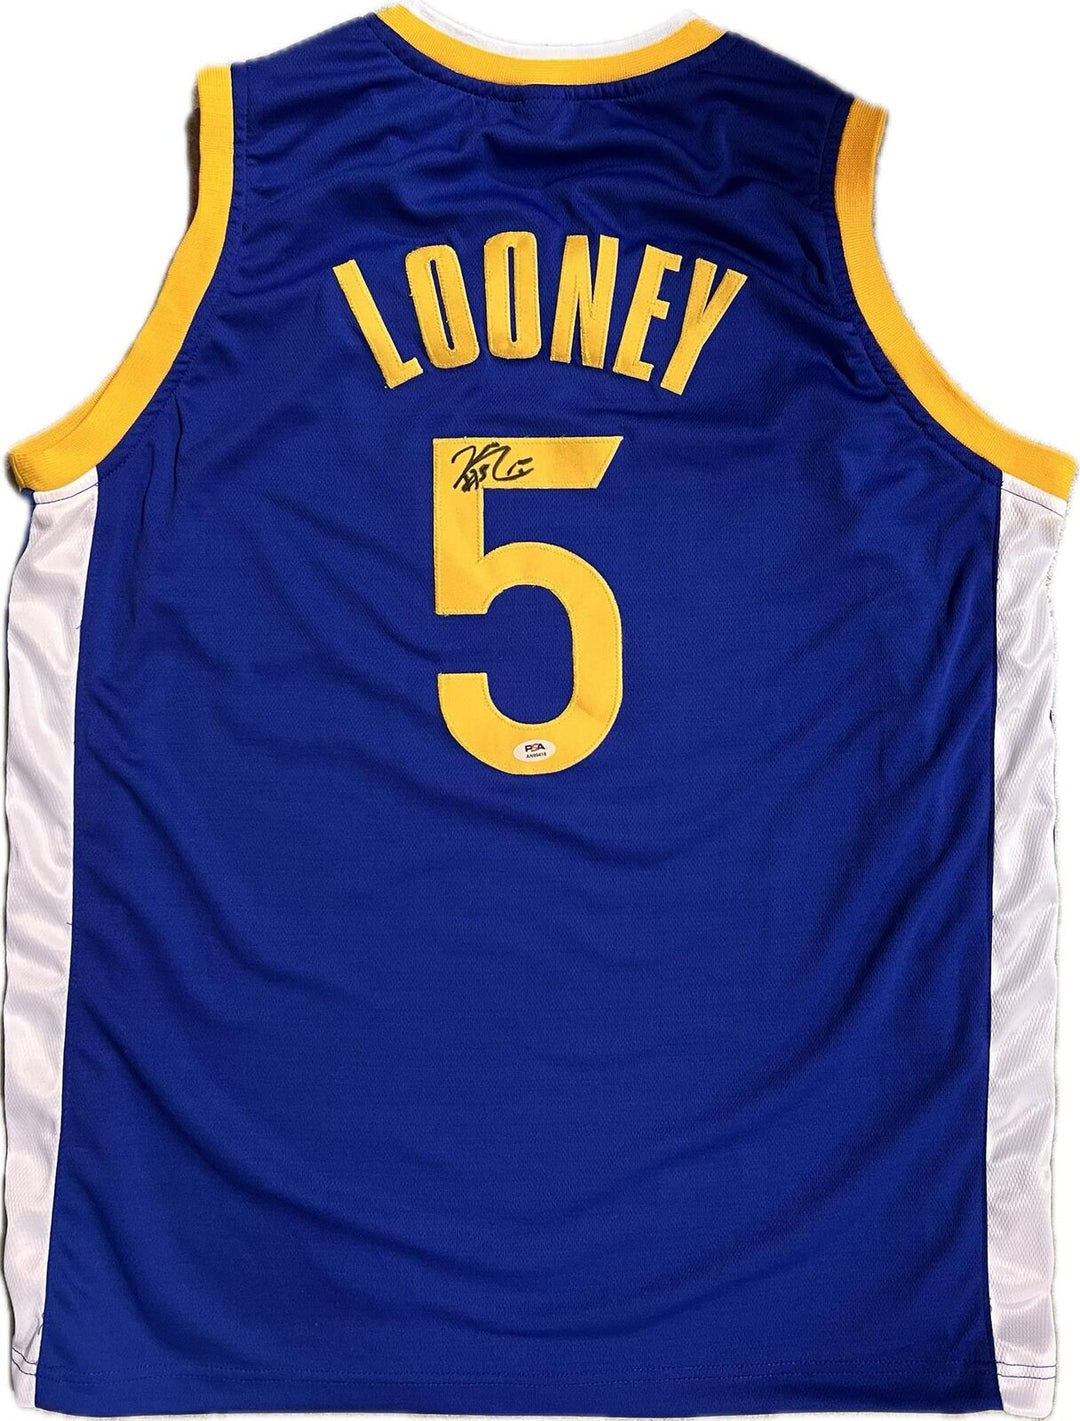 Kevon Looney signed jersey PSA Golden State Warriors Autographed Image 1